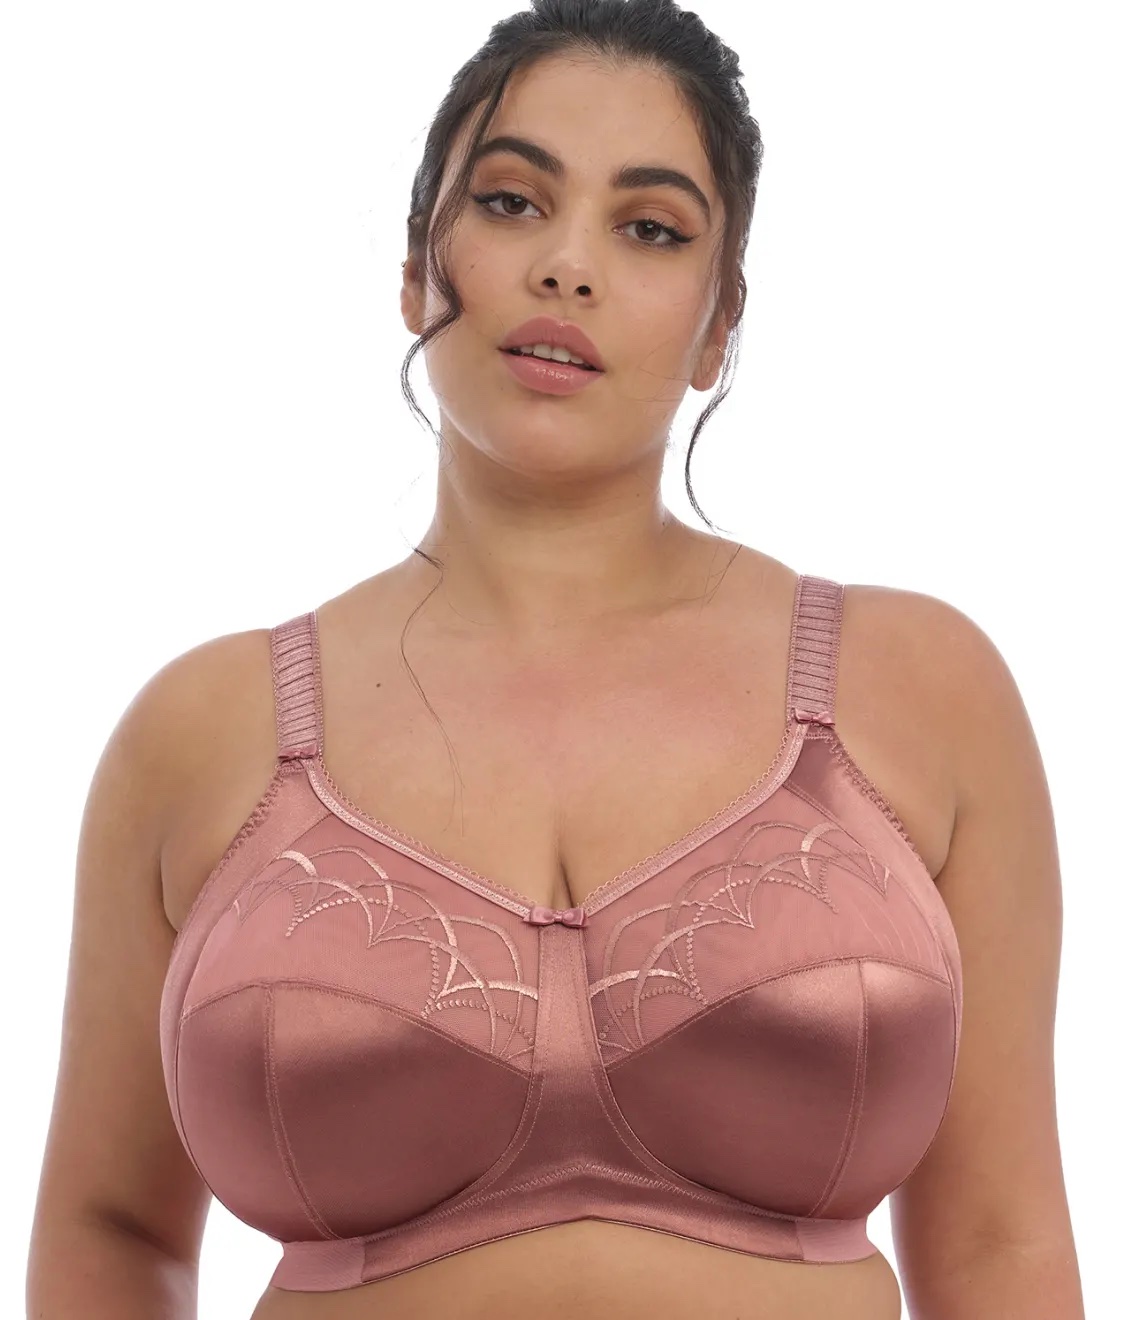 donna funderburk recommends huge tits in bra pic